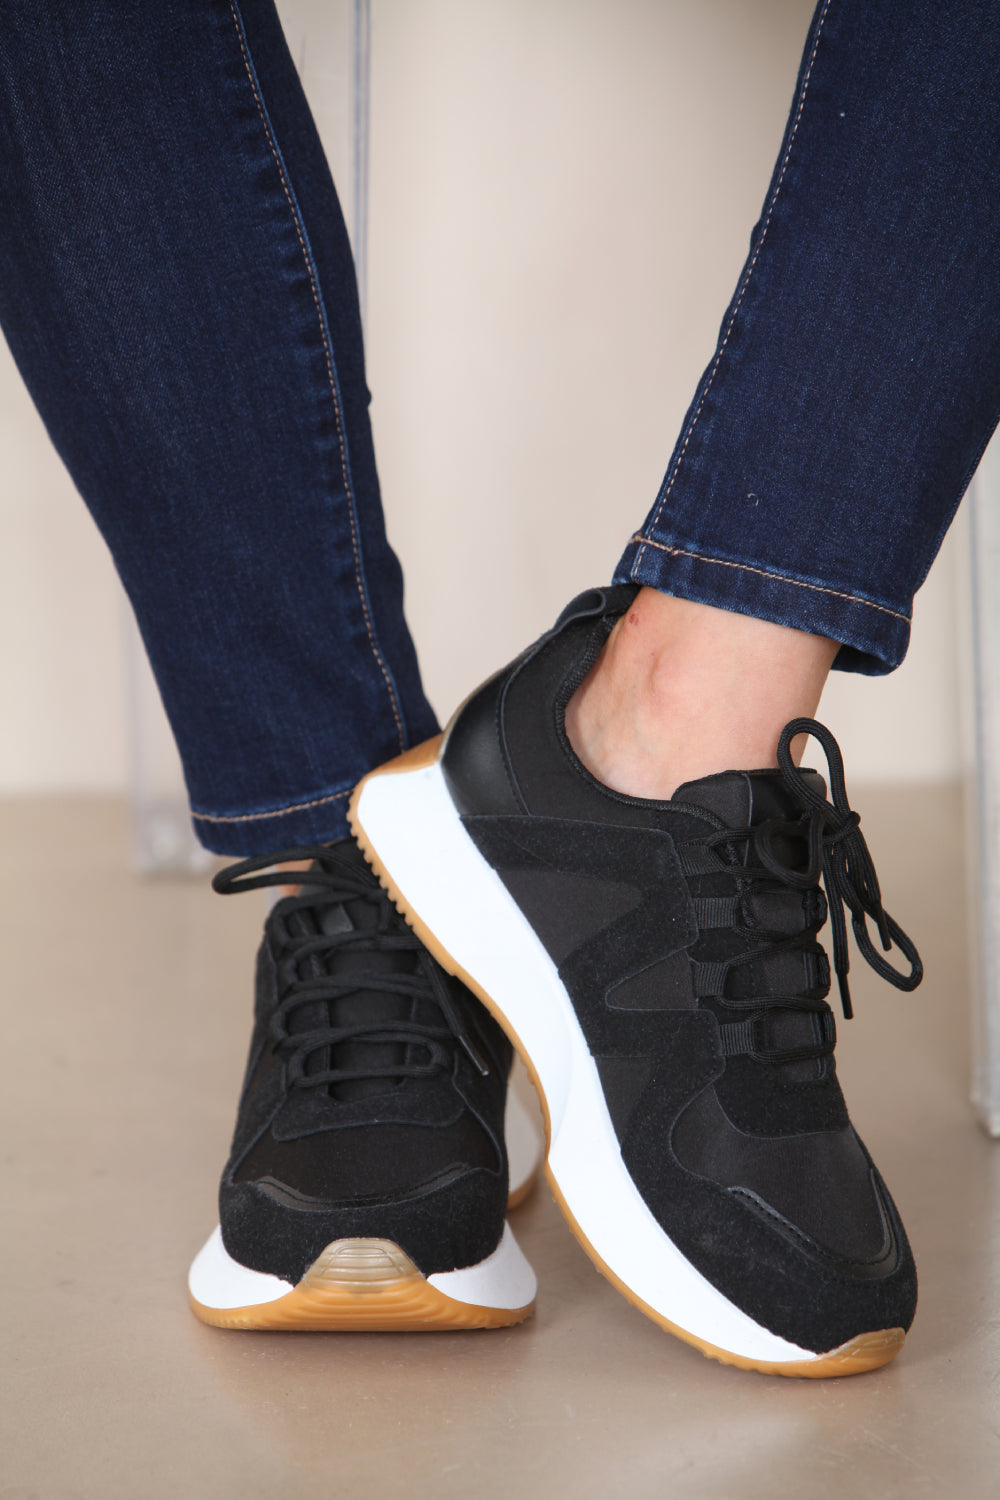 BLACK CHUNK SOLE PATTERN DESIGN LACE UP TRAINERS